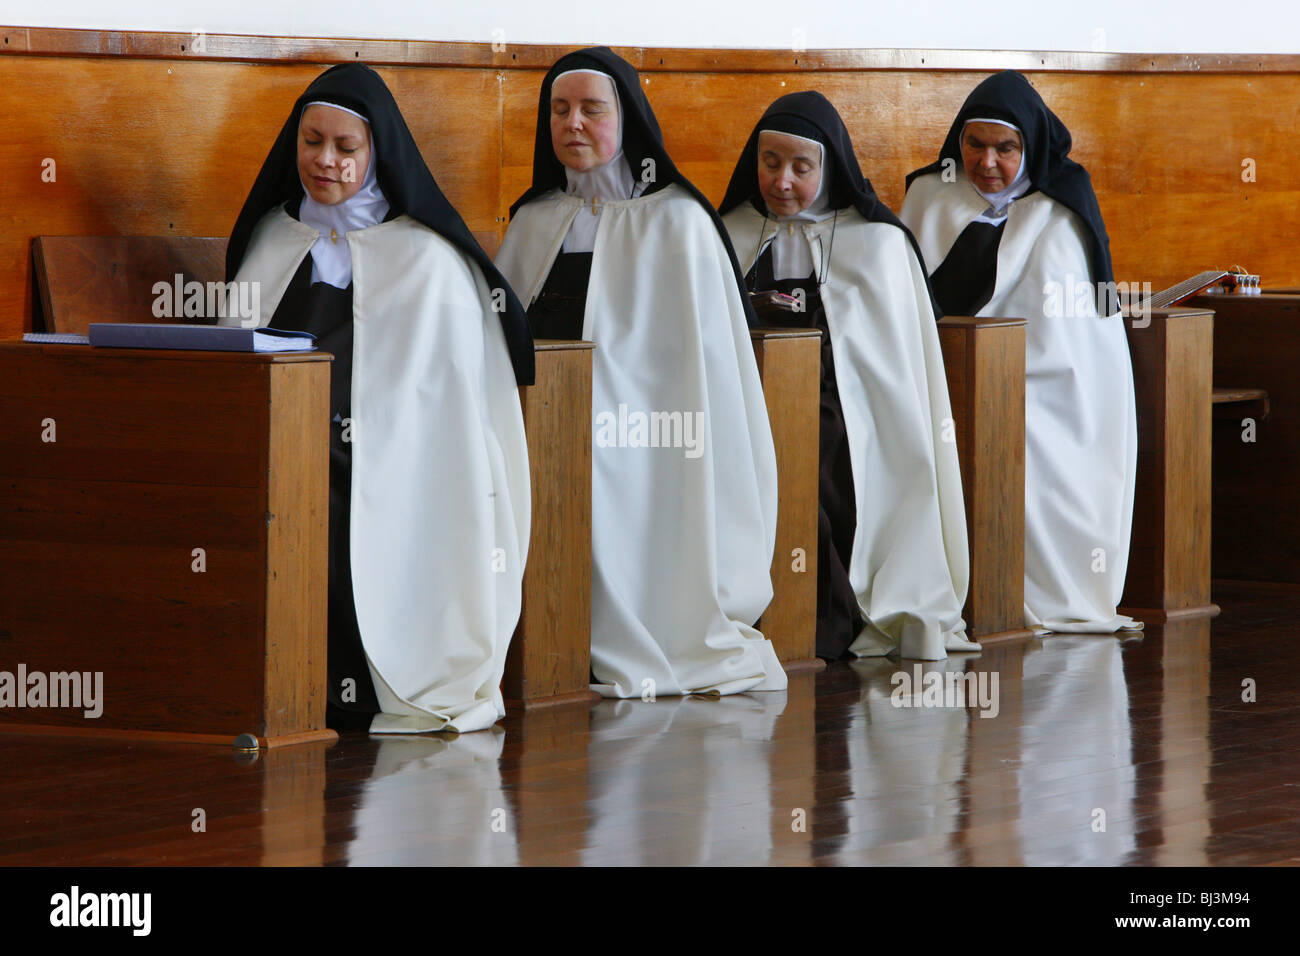 Nuns at devotions, Carmelite Monastery, Puerto Montt, Chile, South America Stock Photo